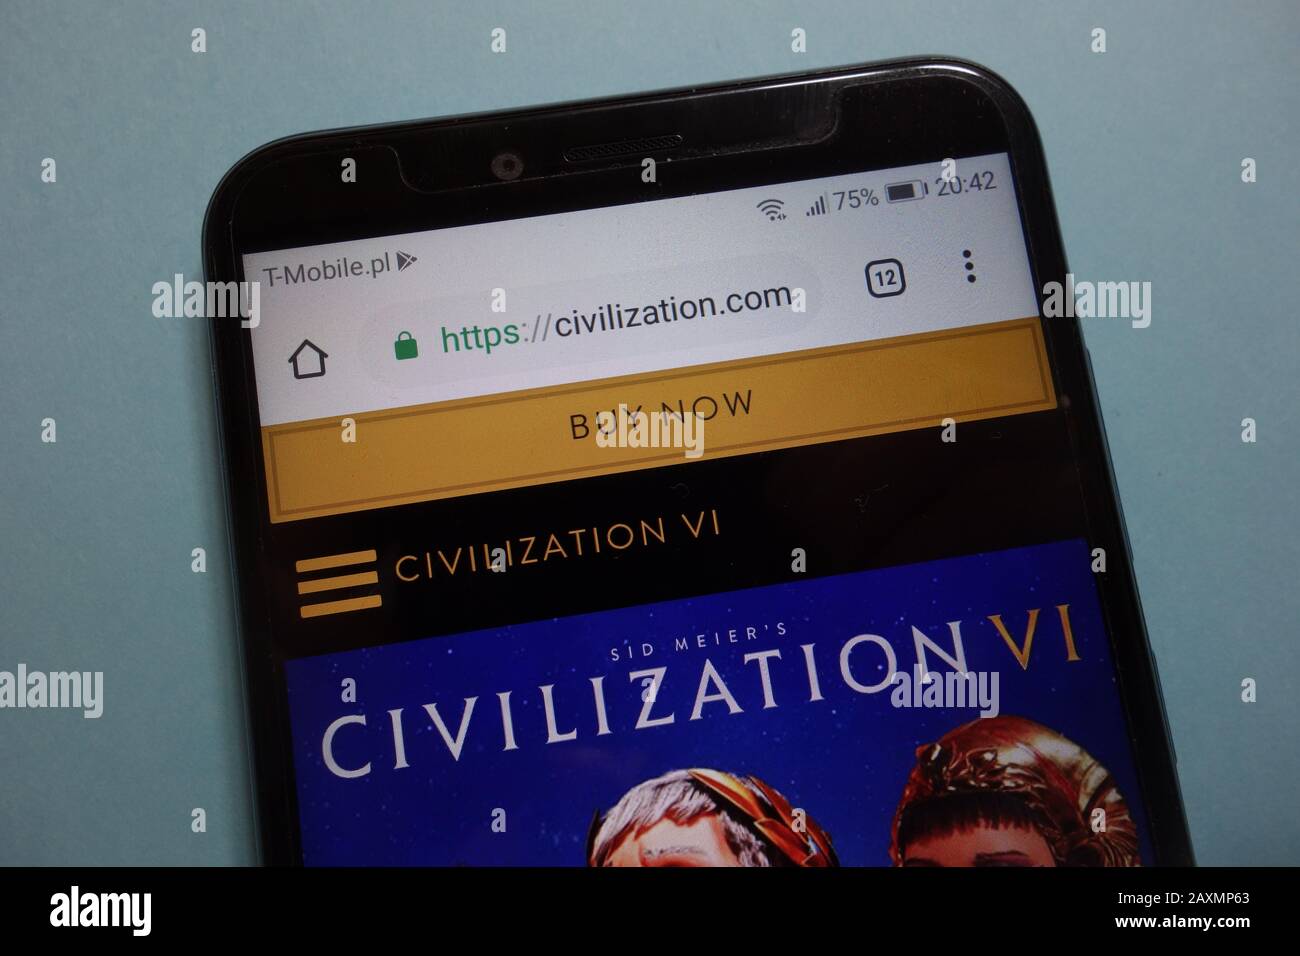 Civilization game official website displayed on smartphone Stock Photo